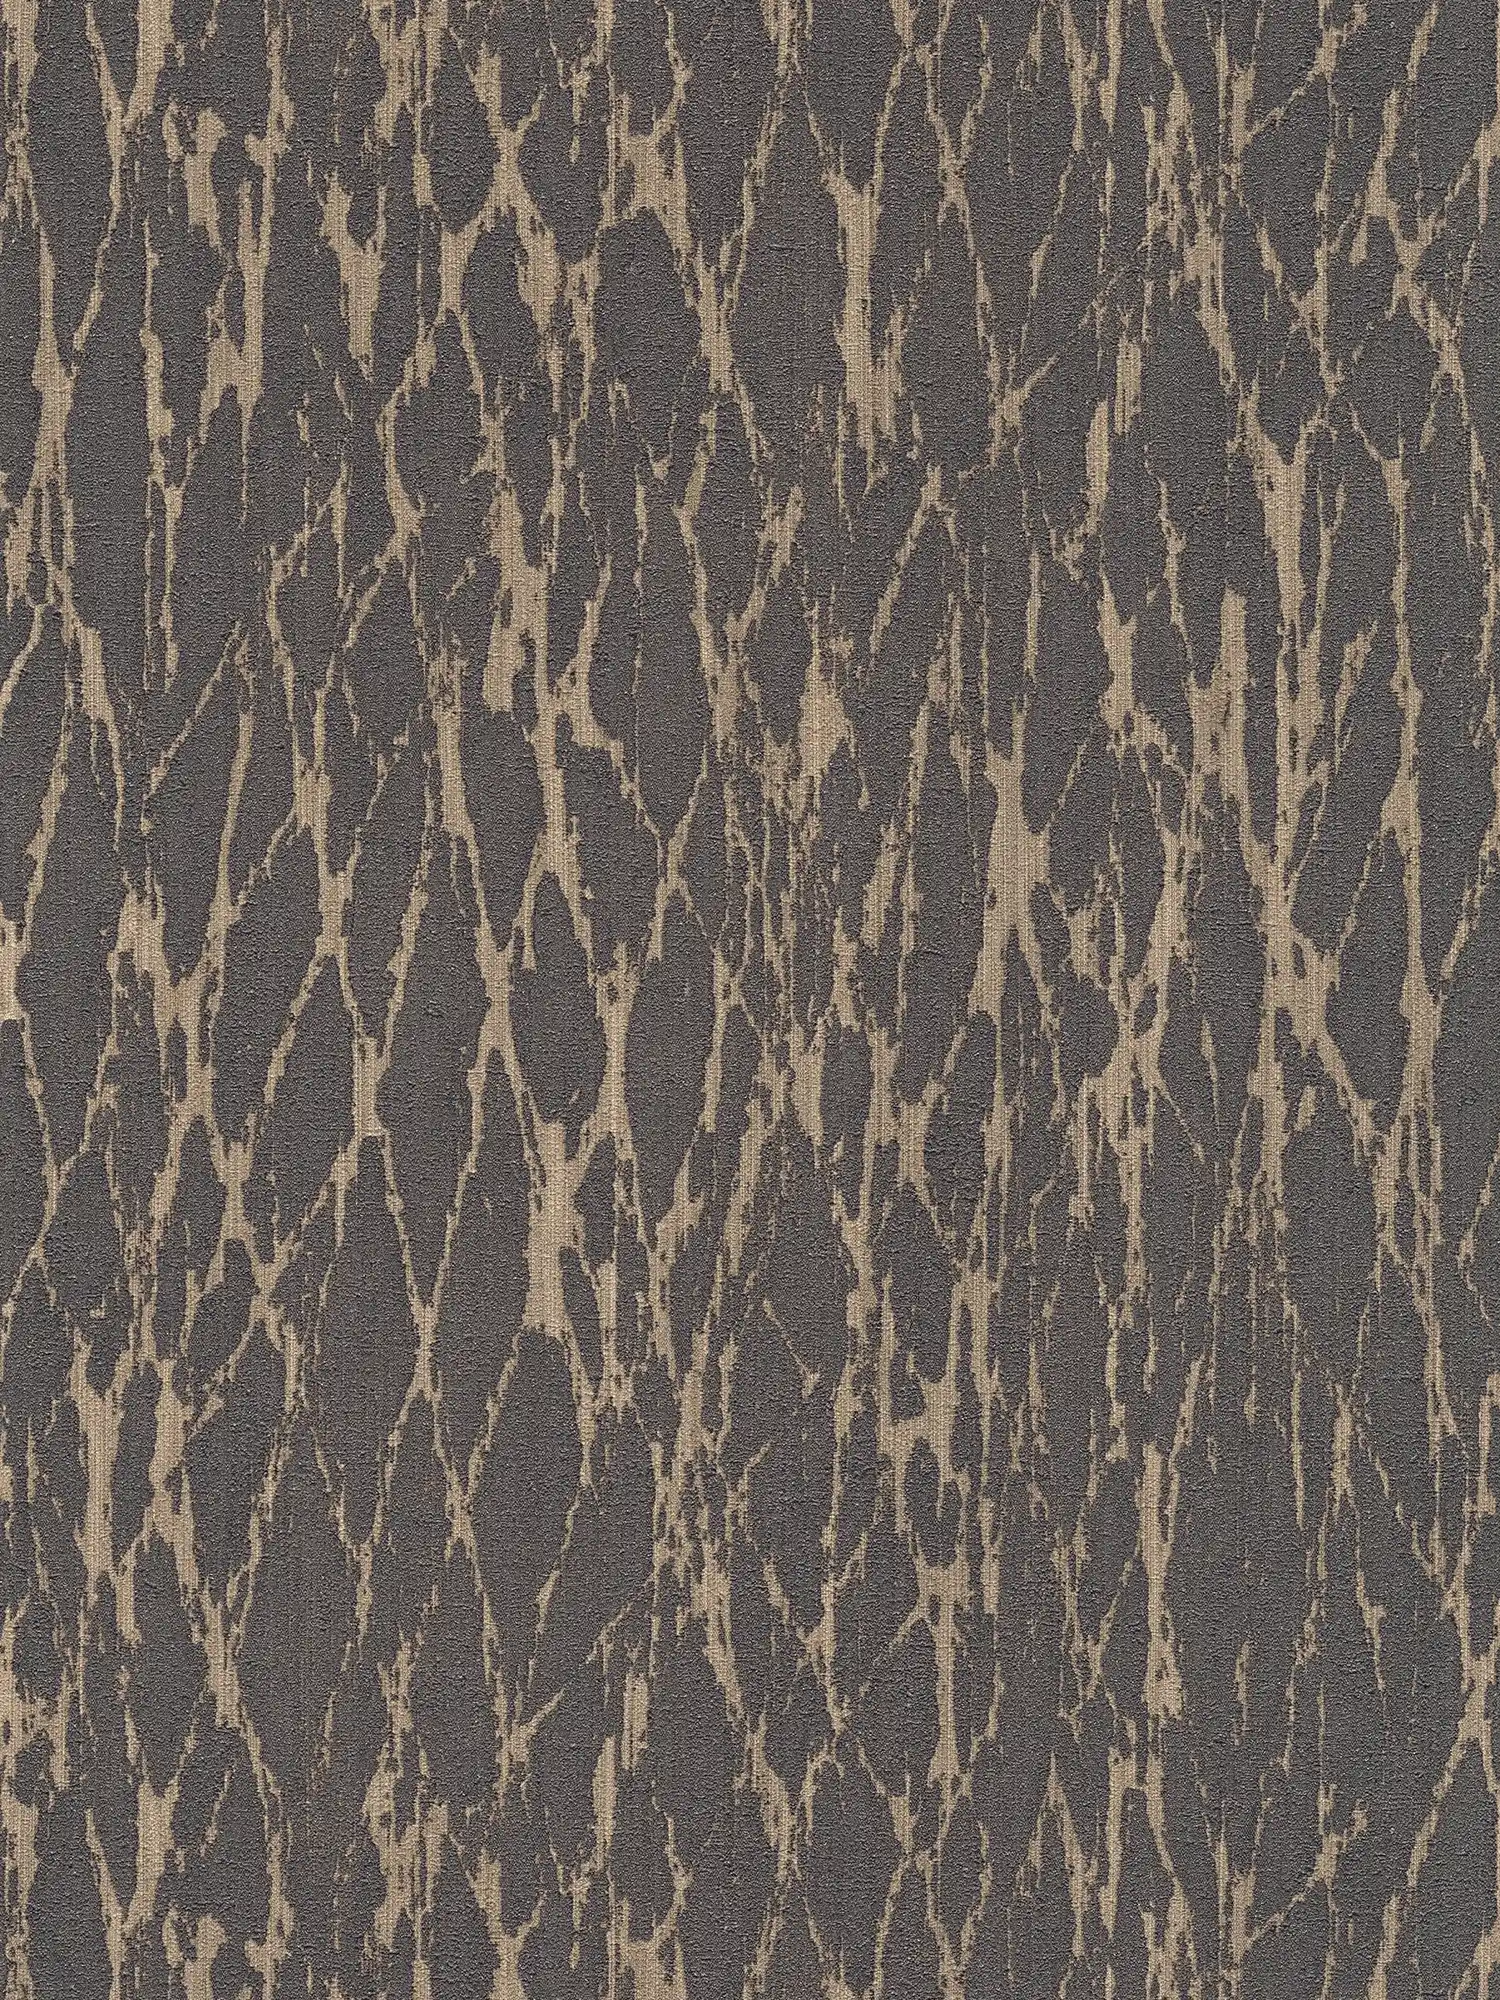 Non-woven wallpaper with wavy line pattern - black, brown, beige
